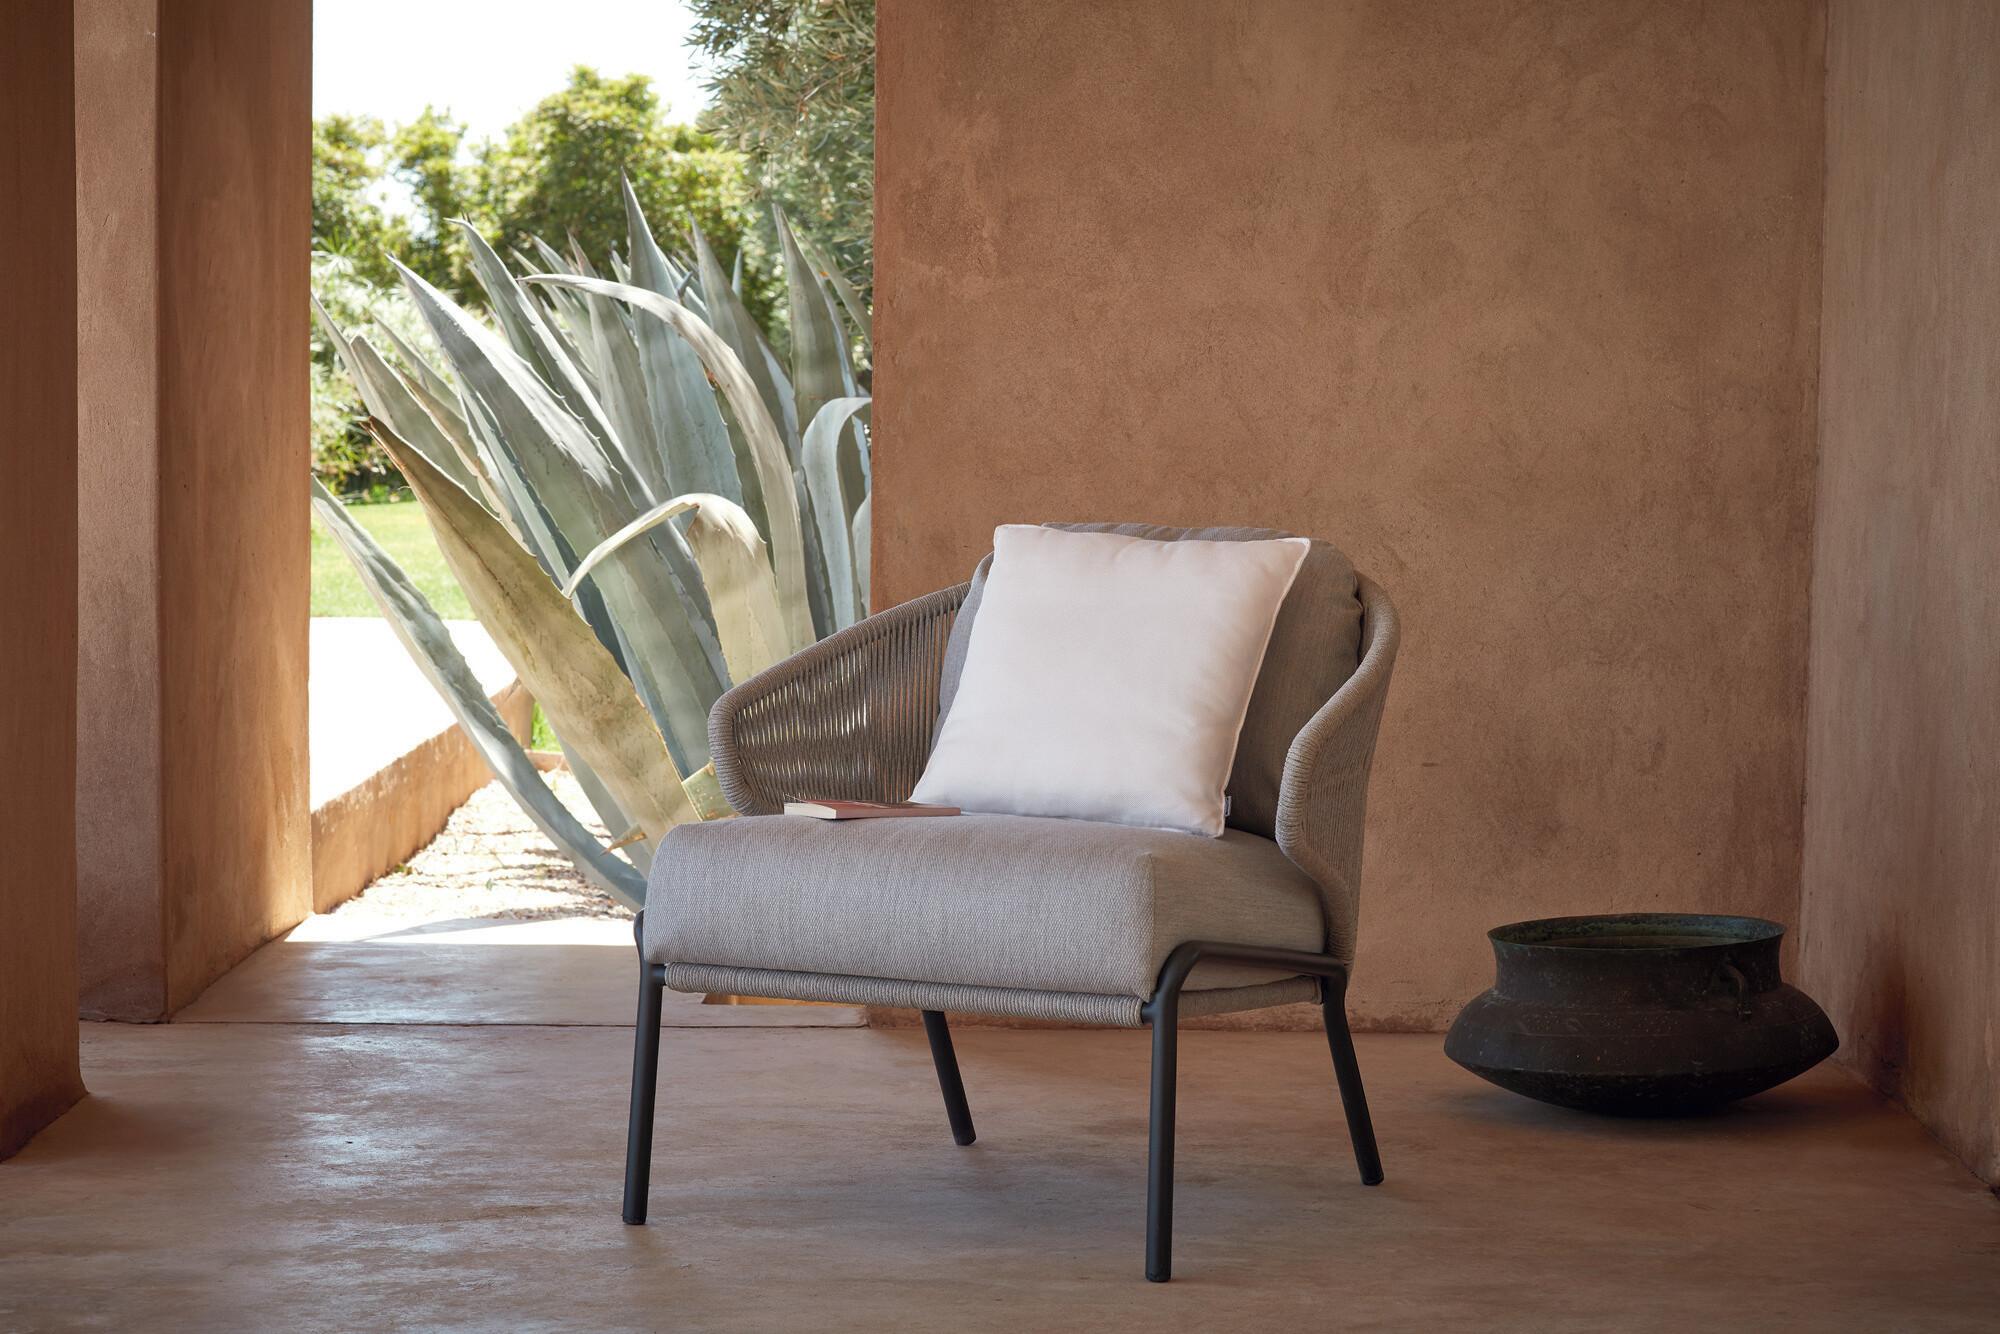 Radoc lounge chair in small patio